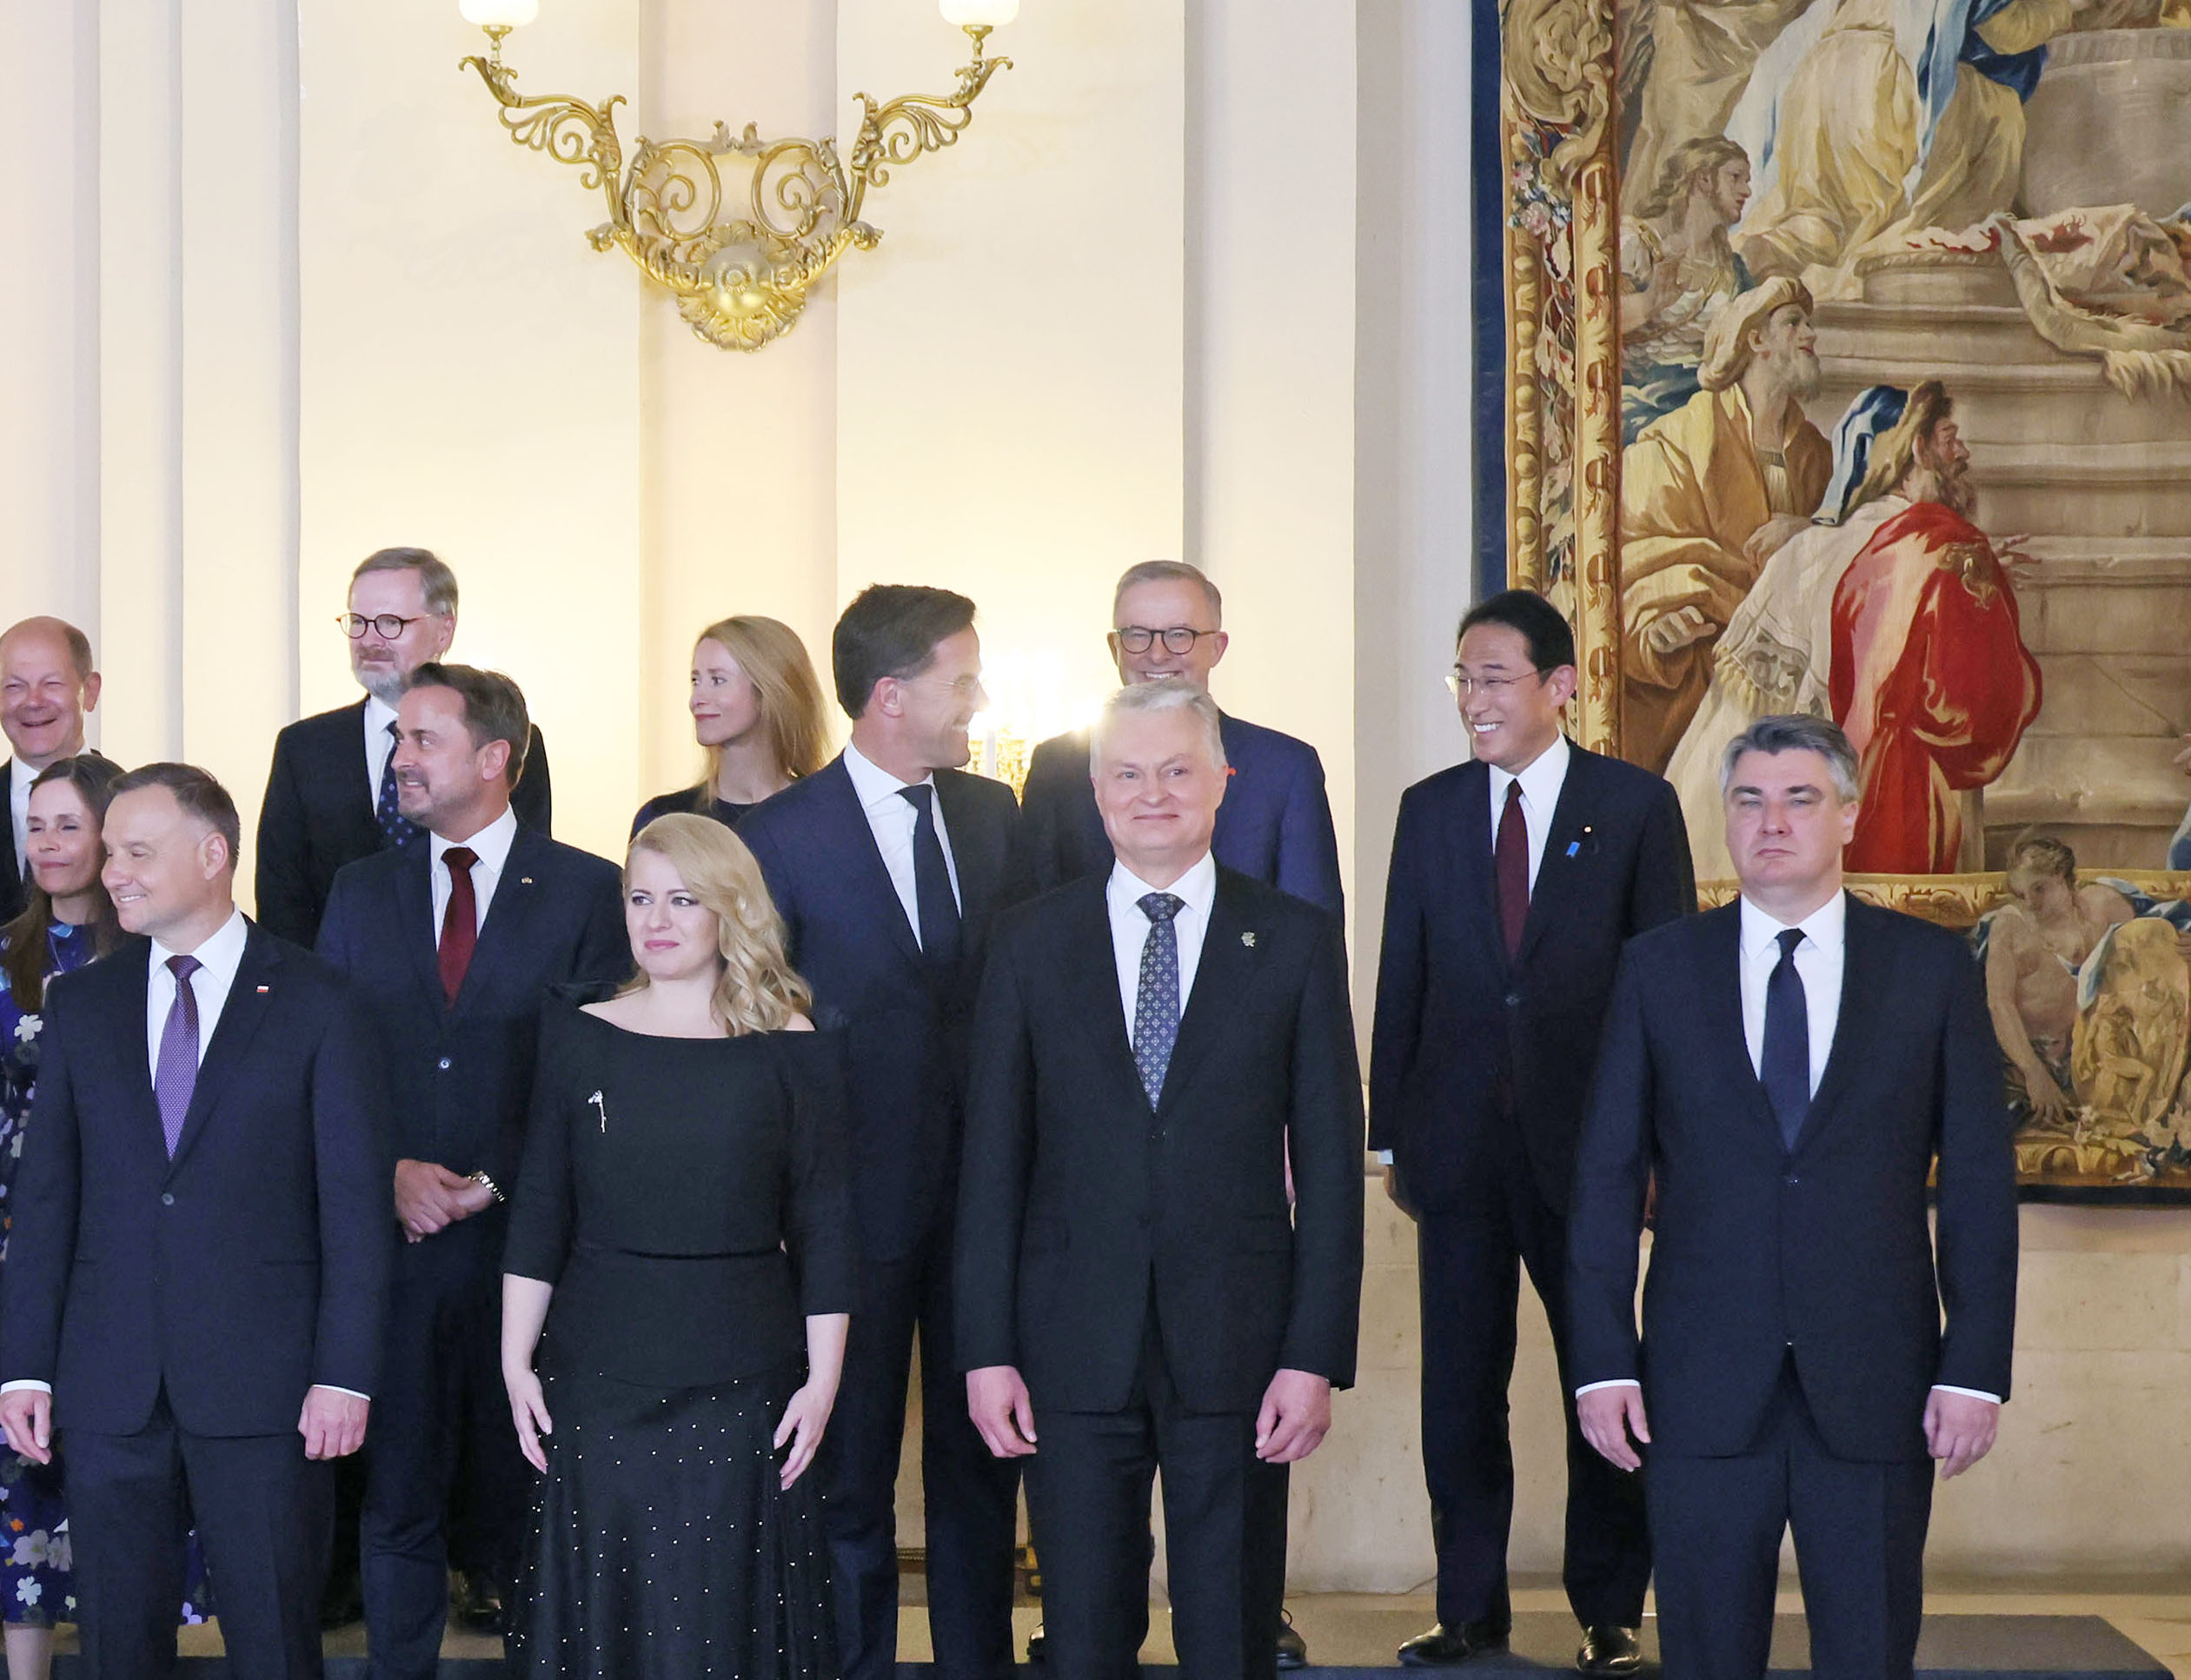 Photograph of a photo session in a dinner hosted by H.M. King Felipe VI (1)